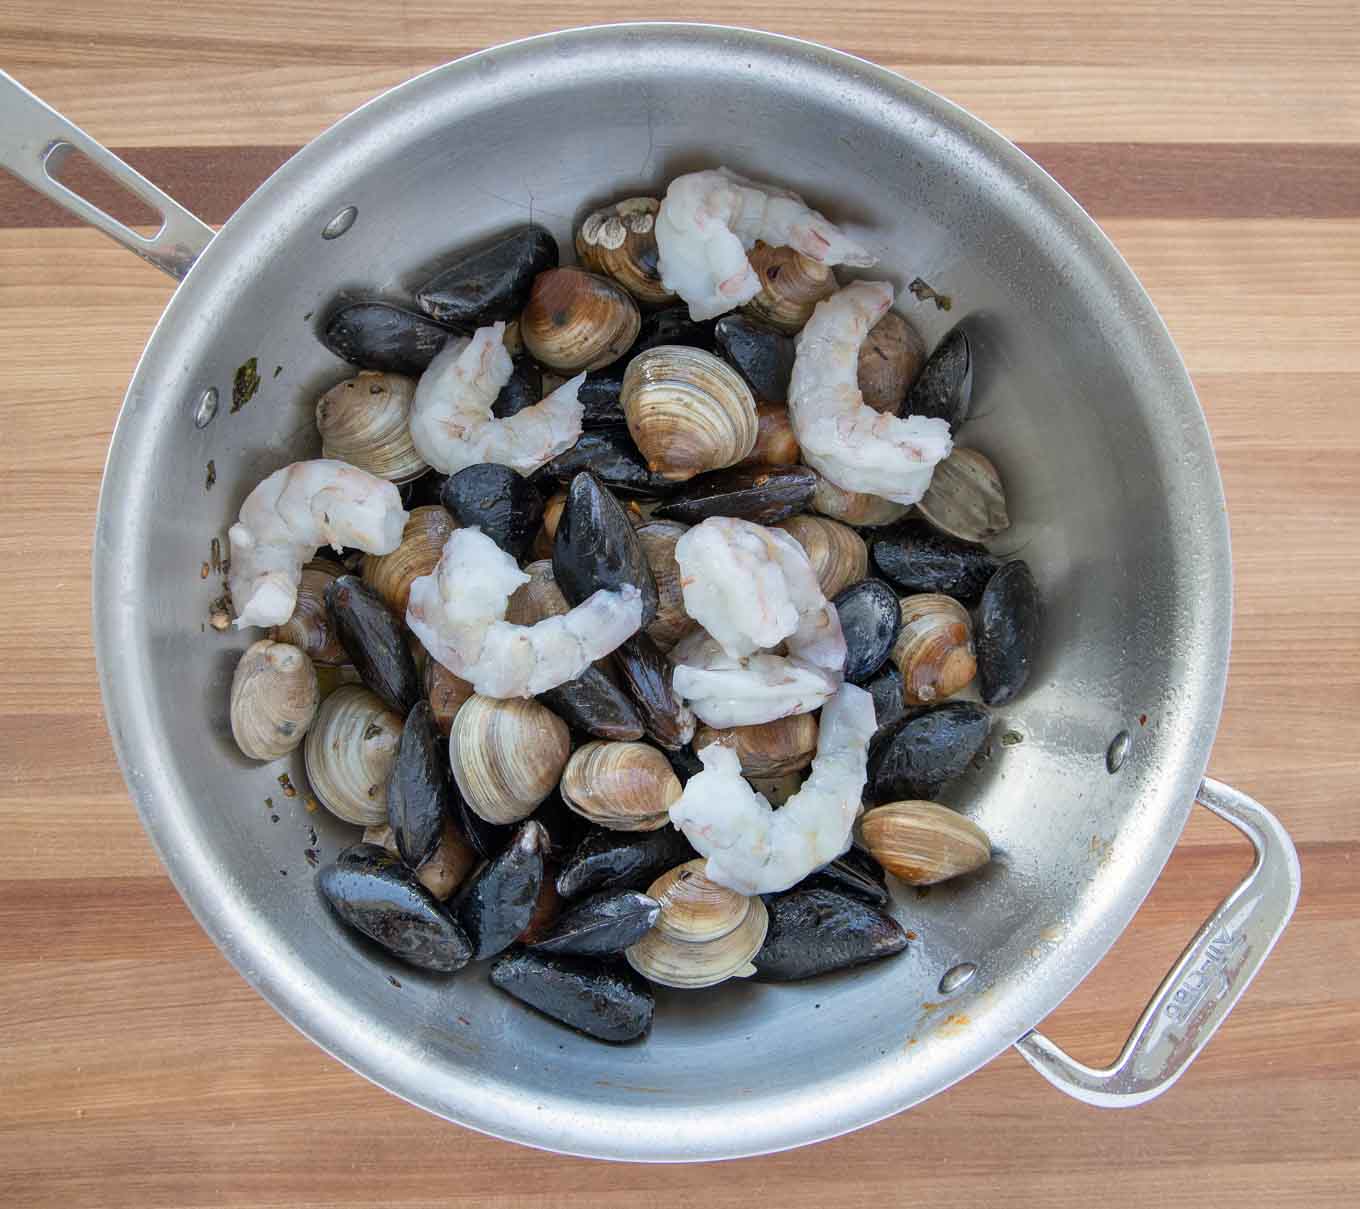 mussels, clams and shrimp added to the large pot